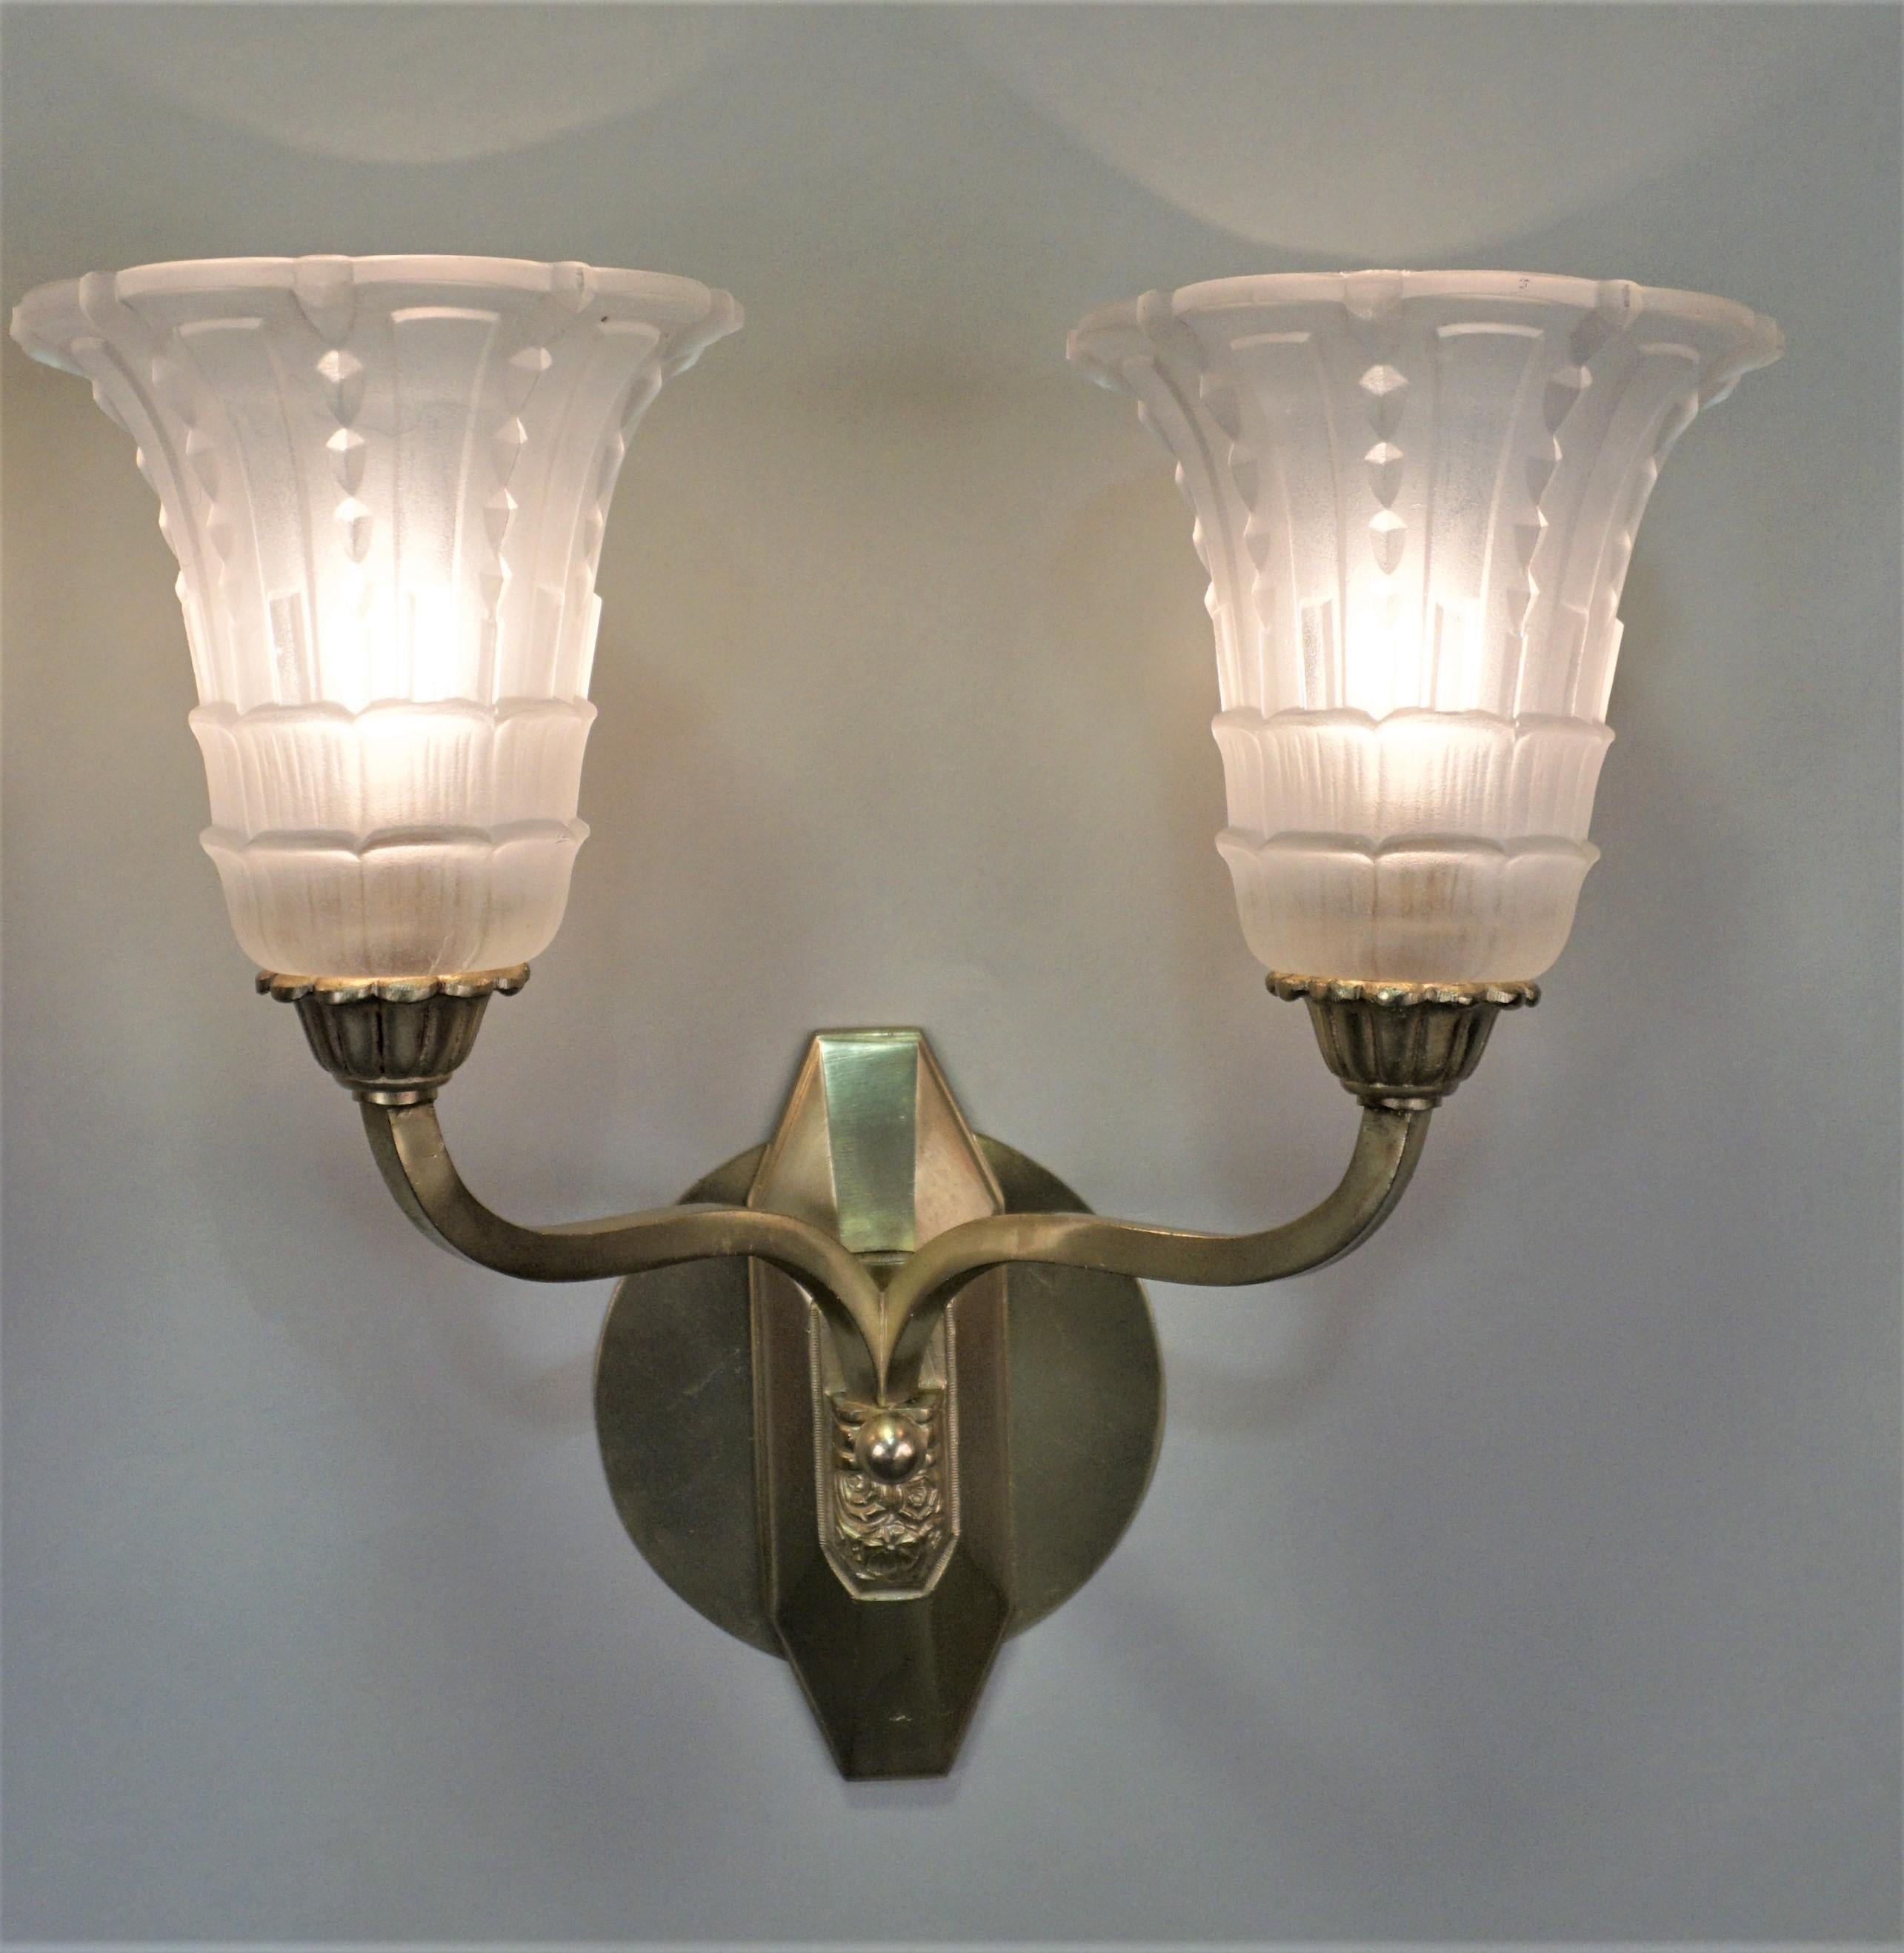 Double arm bronze Art Deco wall sconce with clear frost glass shades.